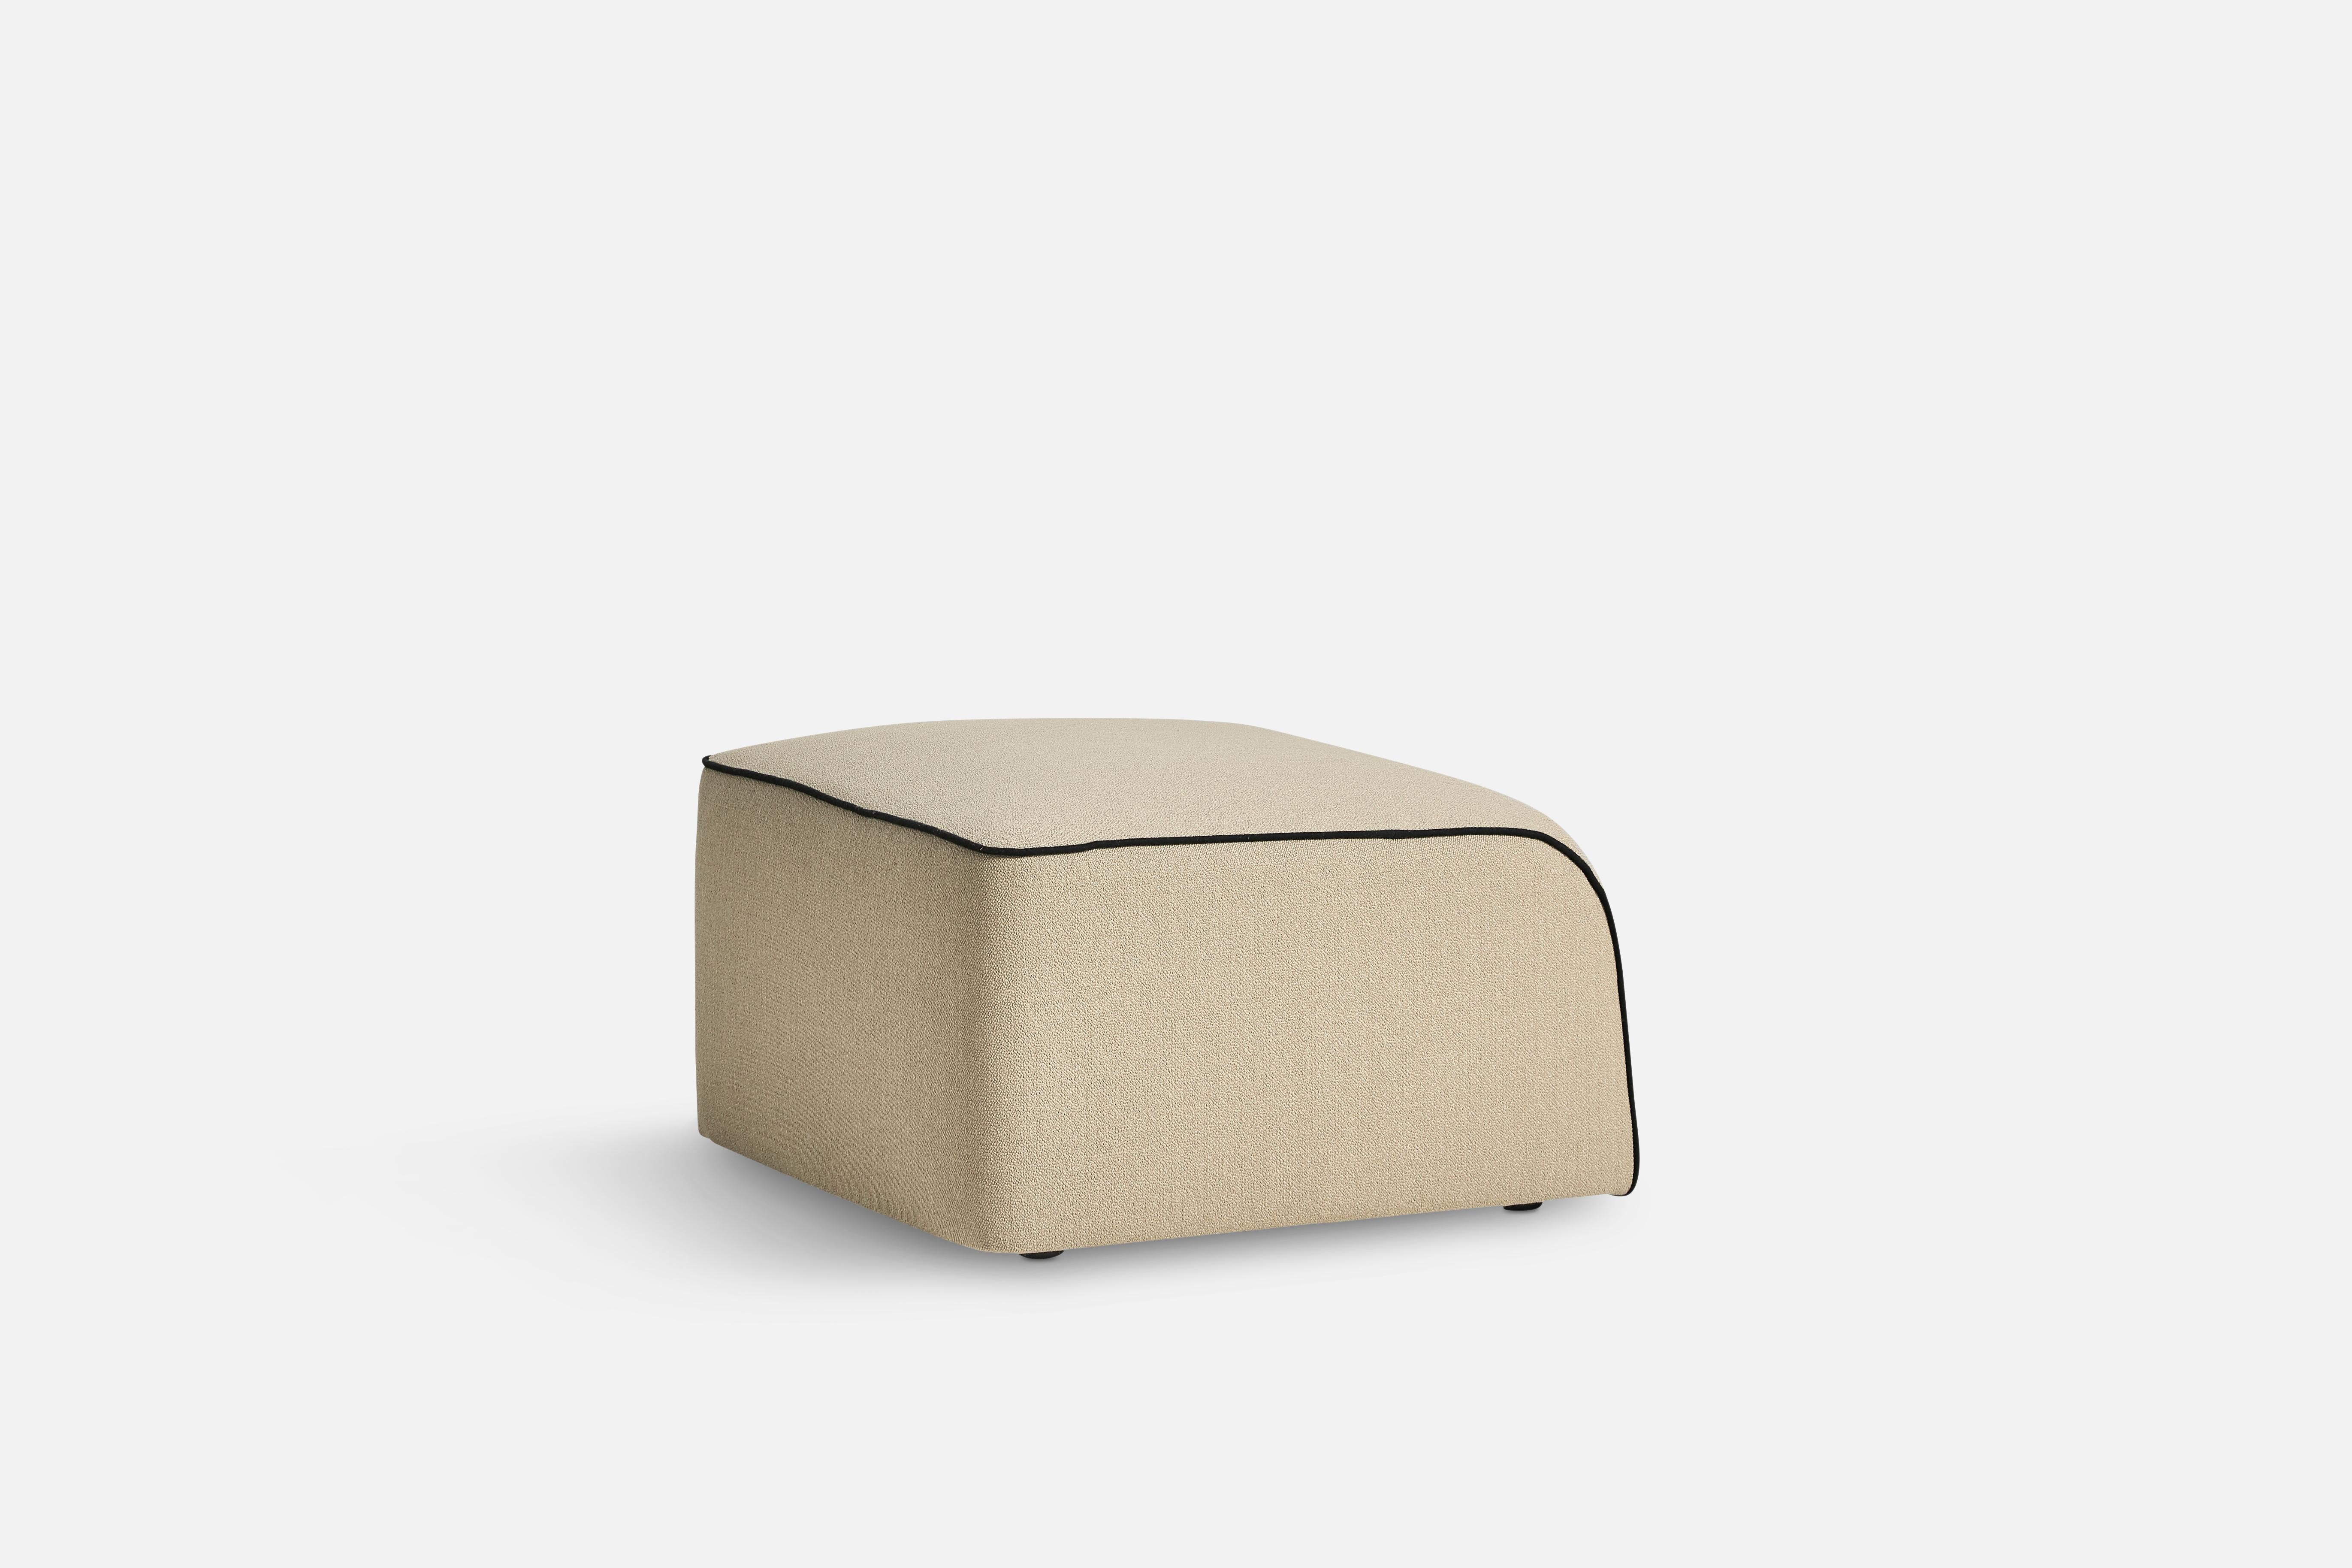 Flora Pouf by Yonoh.
Materials: Plywood, foam, webbing, wood, fabric (Kvadrat Vidar 0323).
Dimensions: D 66 x W 70 x H 43 cm.
Also available in different colours and materials.

The founders, Mia and Torben Koed, decided to put their 30 years